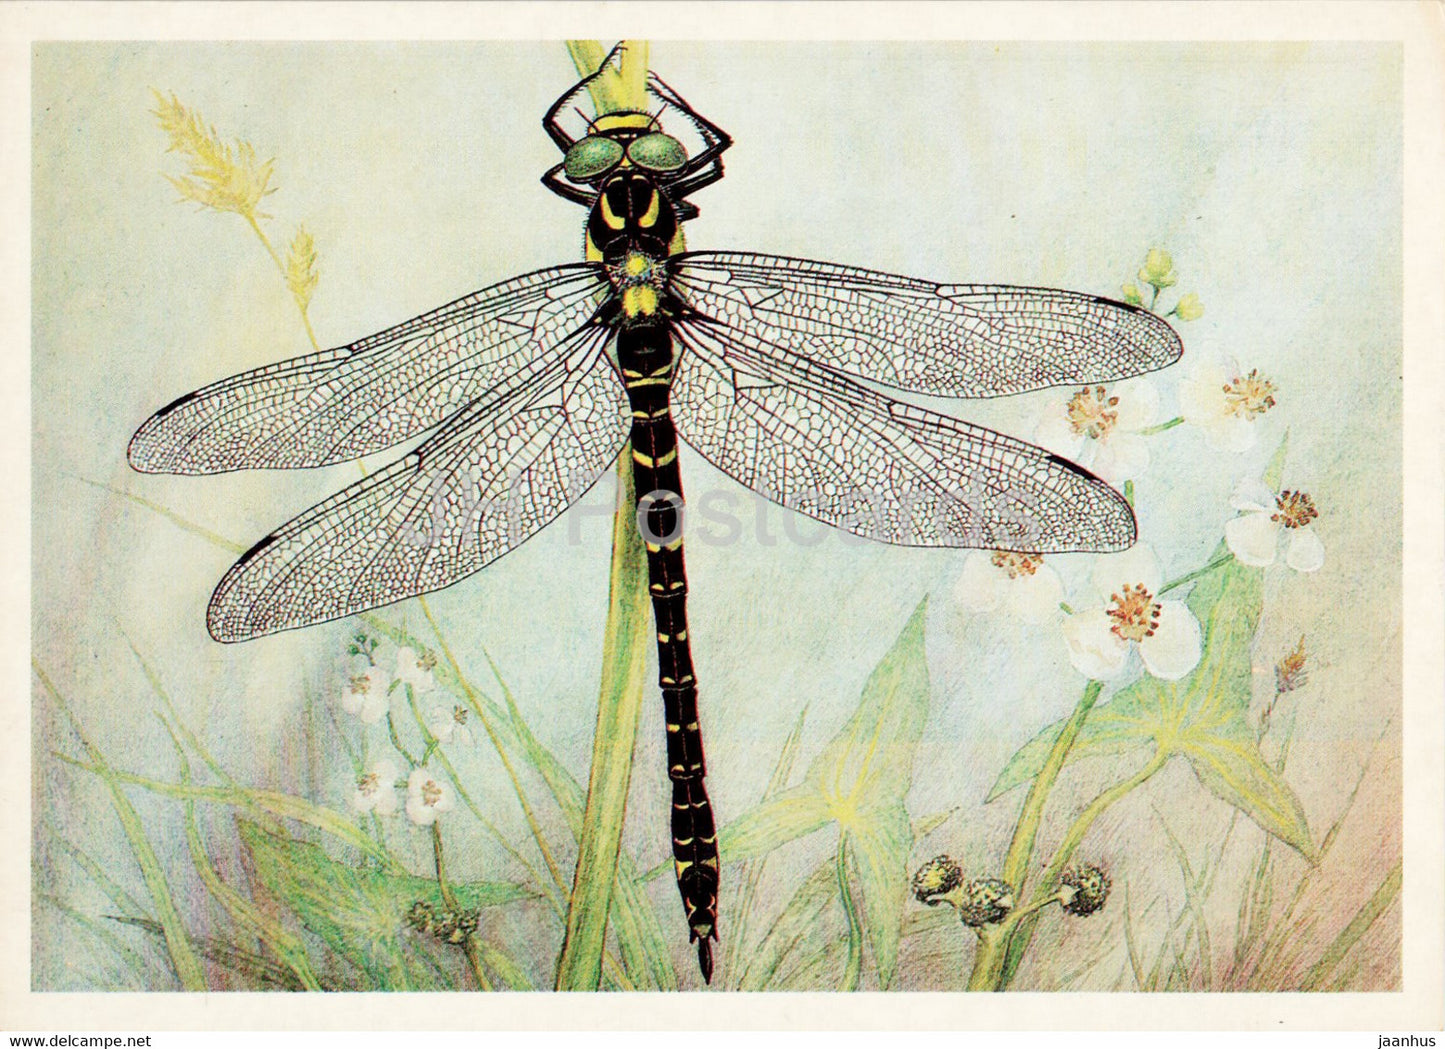 Cordulegaster annulatus - Golden-ringed dragonfly - dragonfly - Insects - illustration - 1987 - Russia USSR - unused - JH Postcards